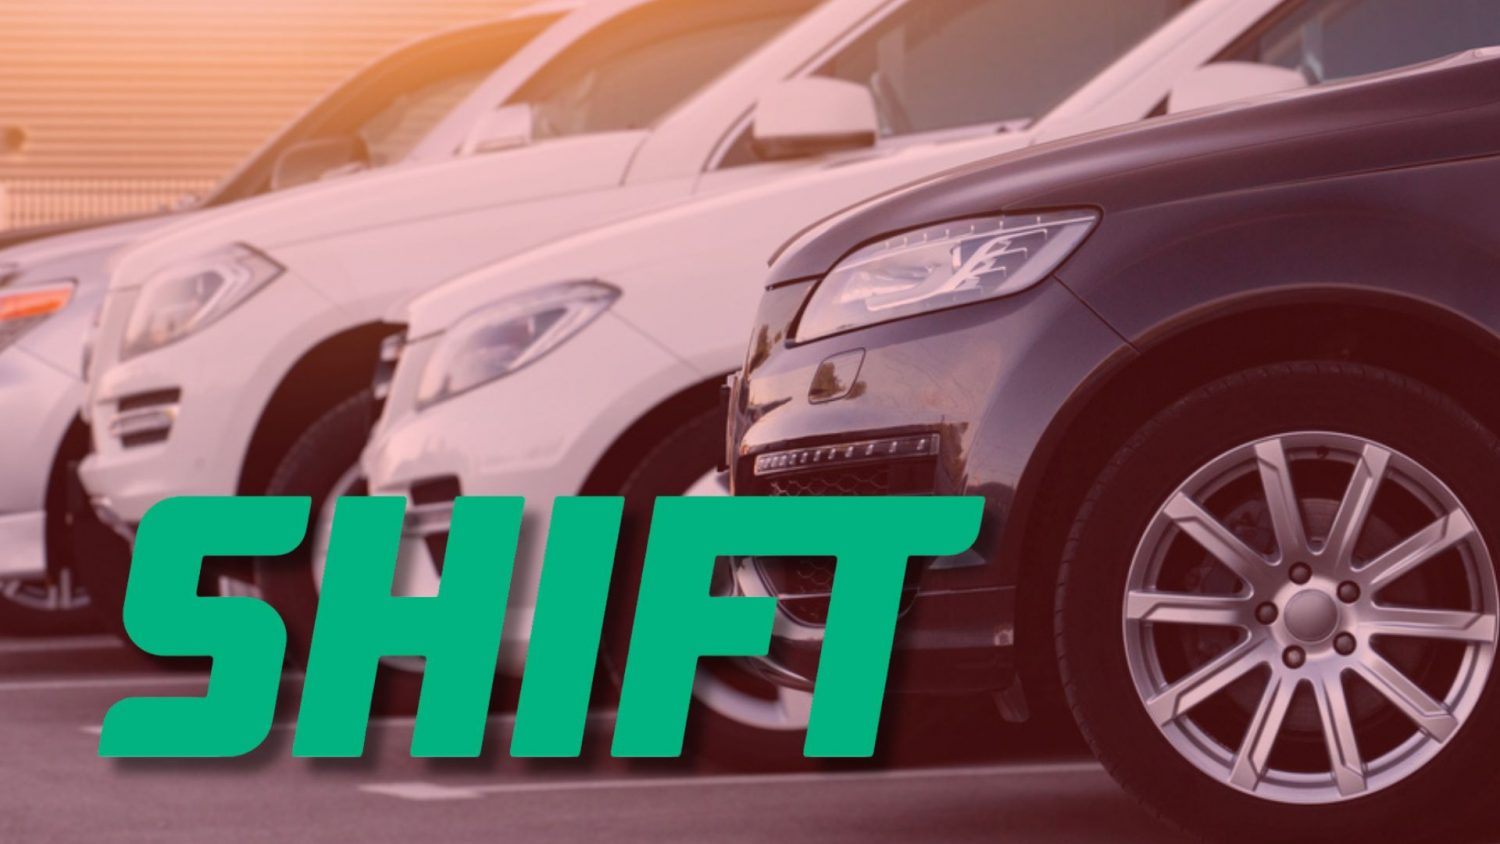 Used-car retailer Shift Technologies announces plan to file for Chapter 11 bankruptcy following multiple years of losses.